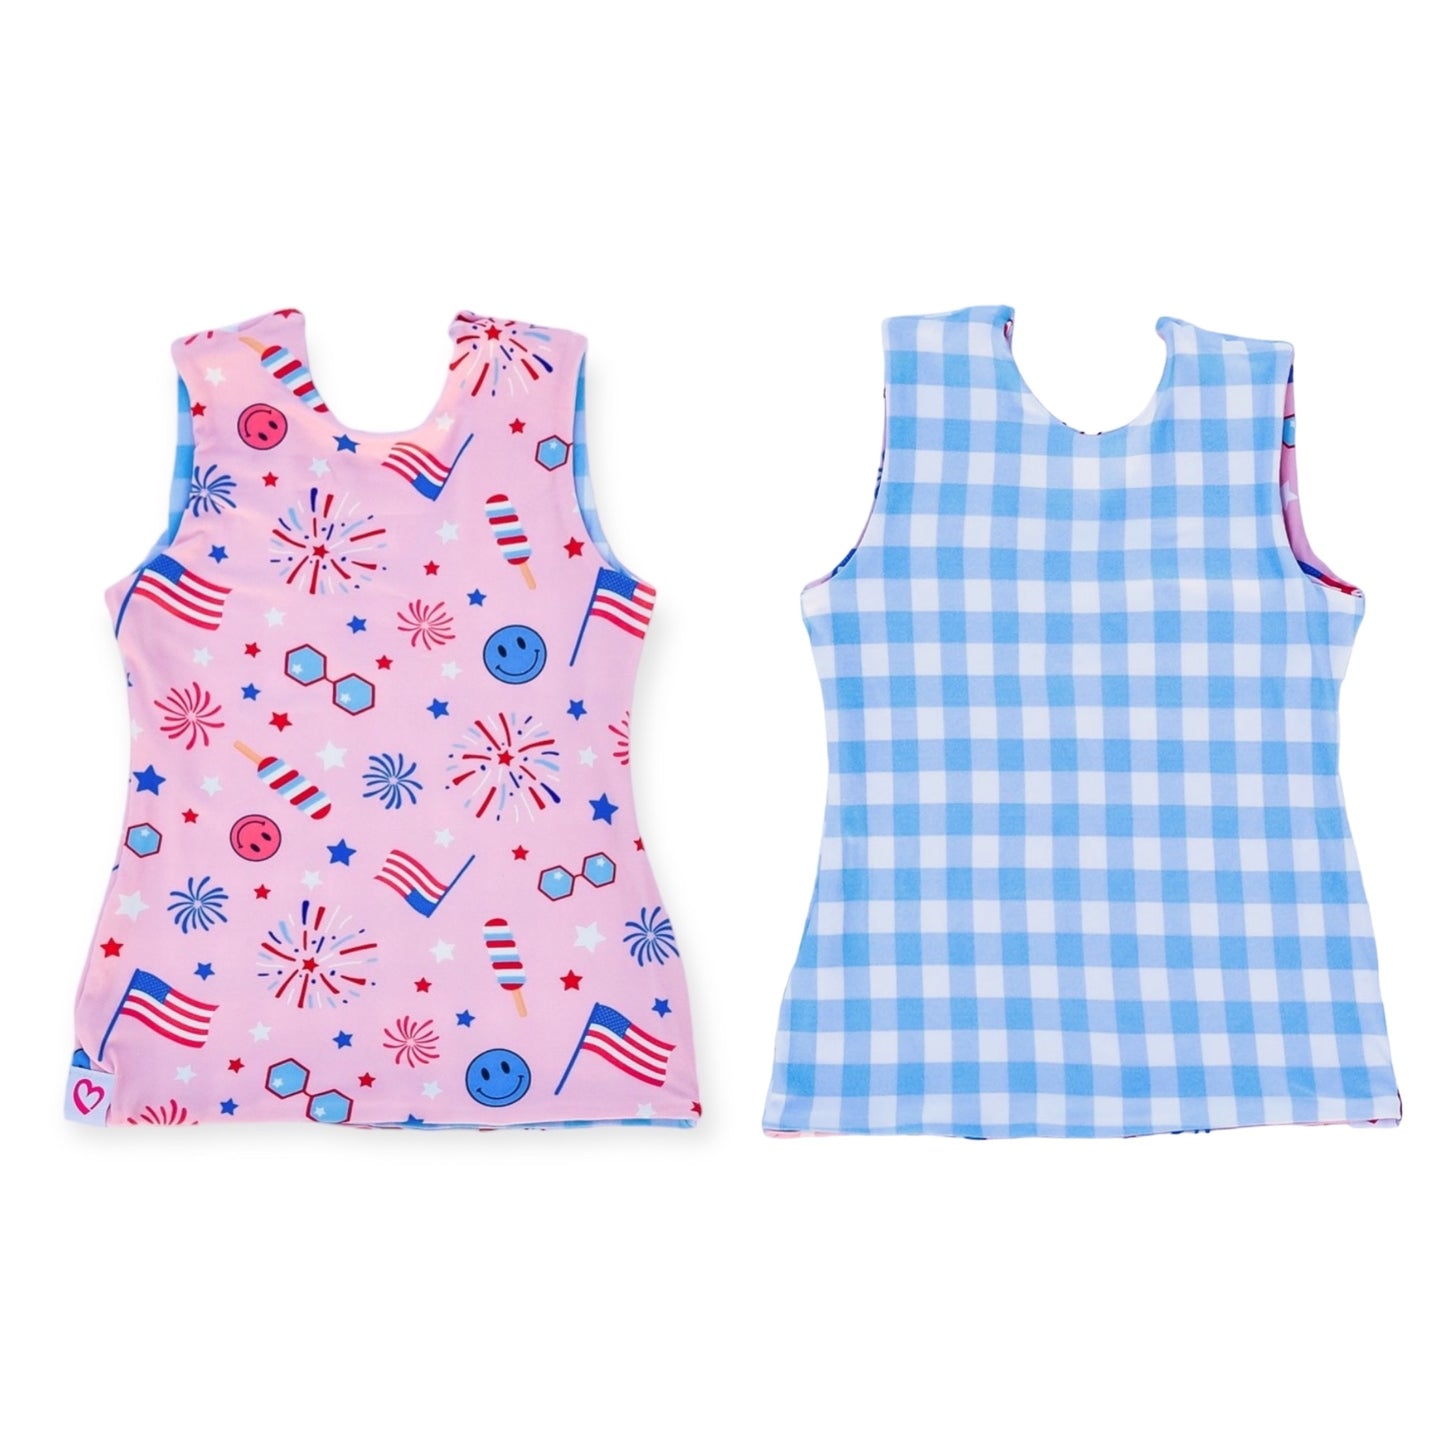 Fitted Top - RWB Smiley/Blue gingham  (Reversible)